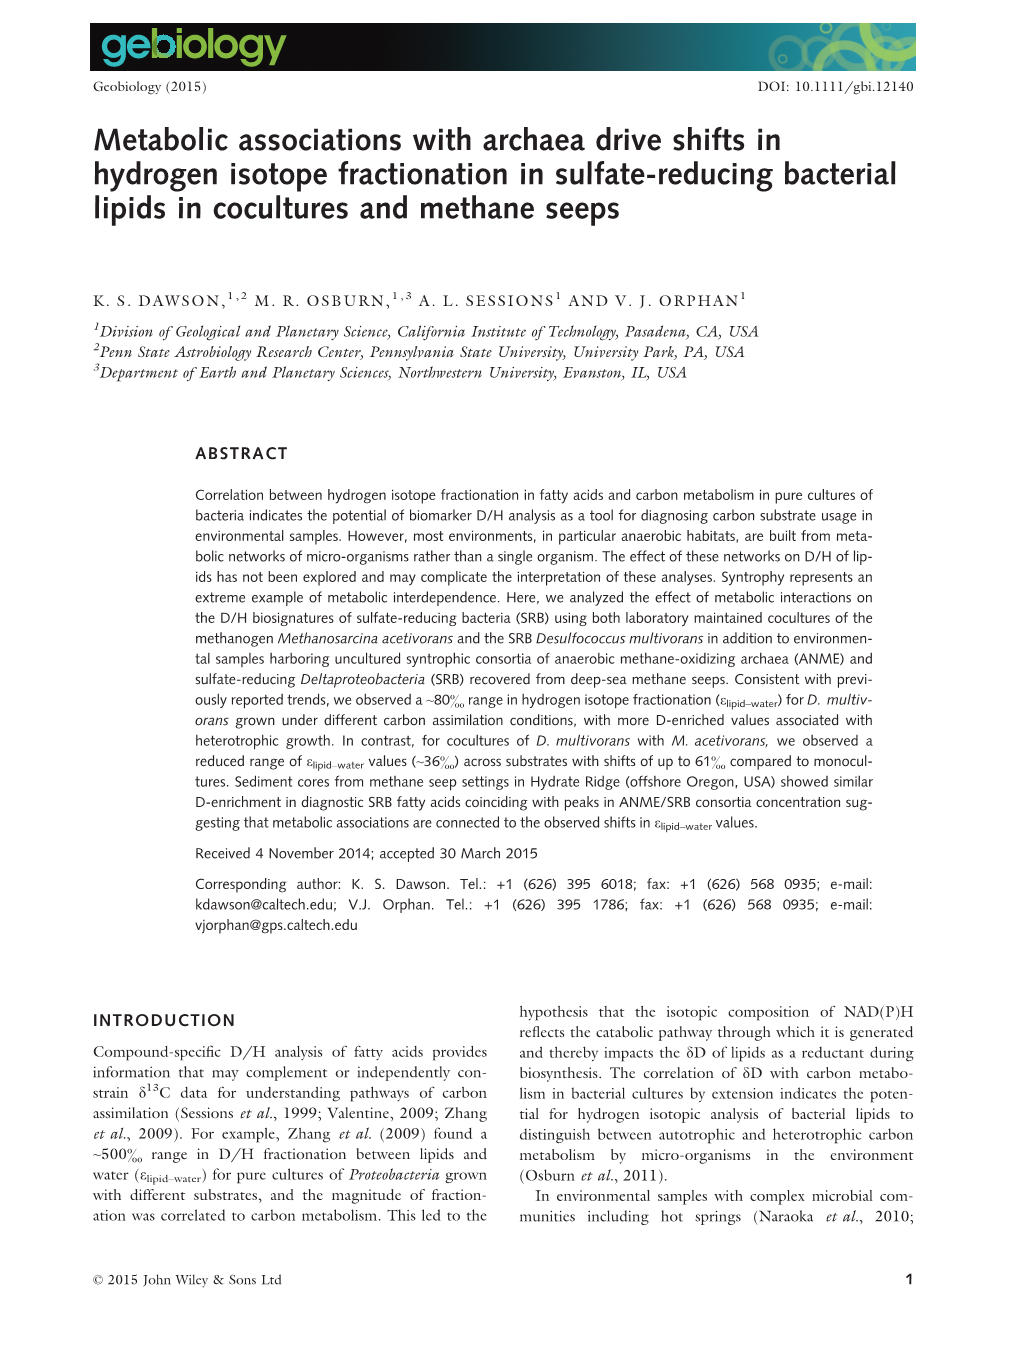 Metabolic Associations with Archaea Drive Shifts in Hydrogen Isotope Fractionation in Sulfate-Reducing Bacterial Lipids in Cocultures and Methane Seeps